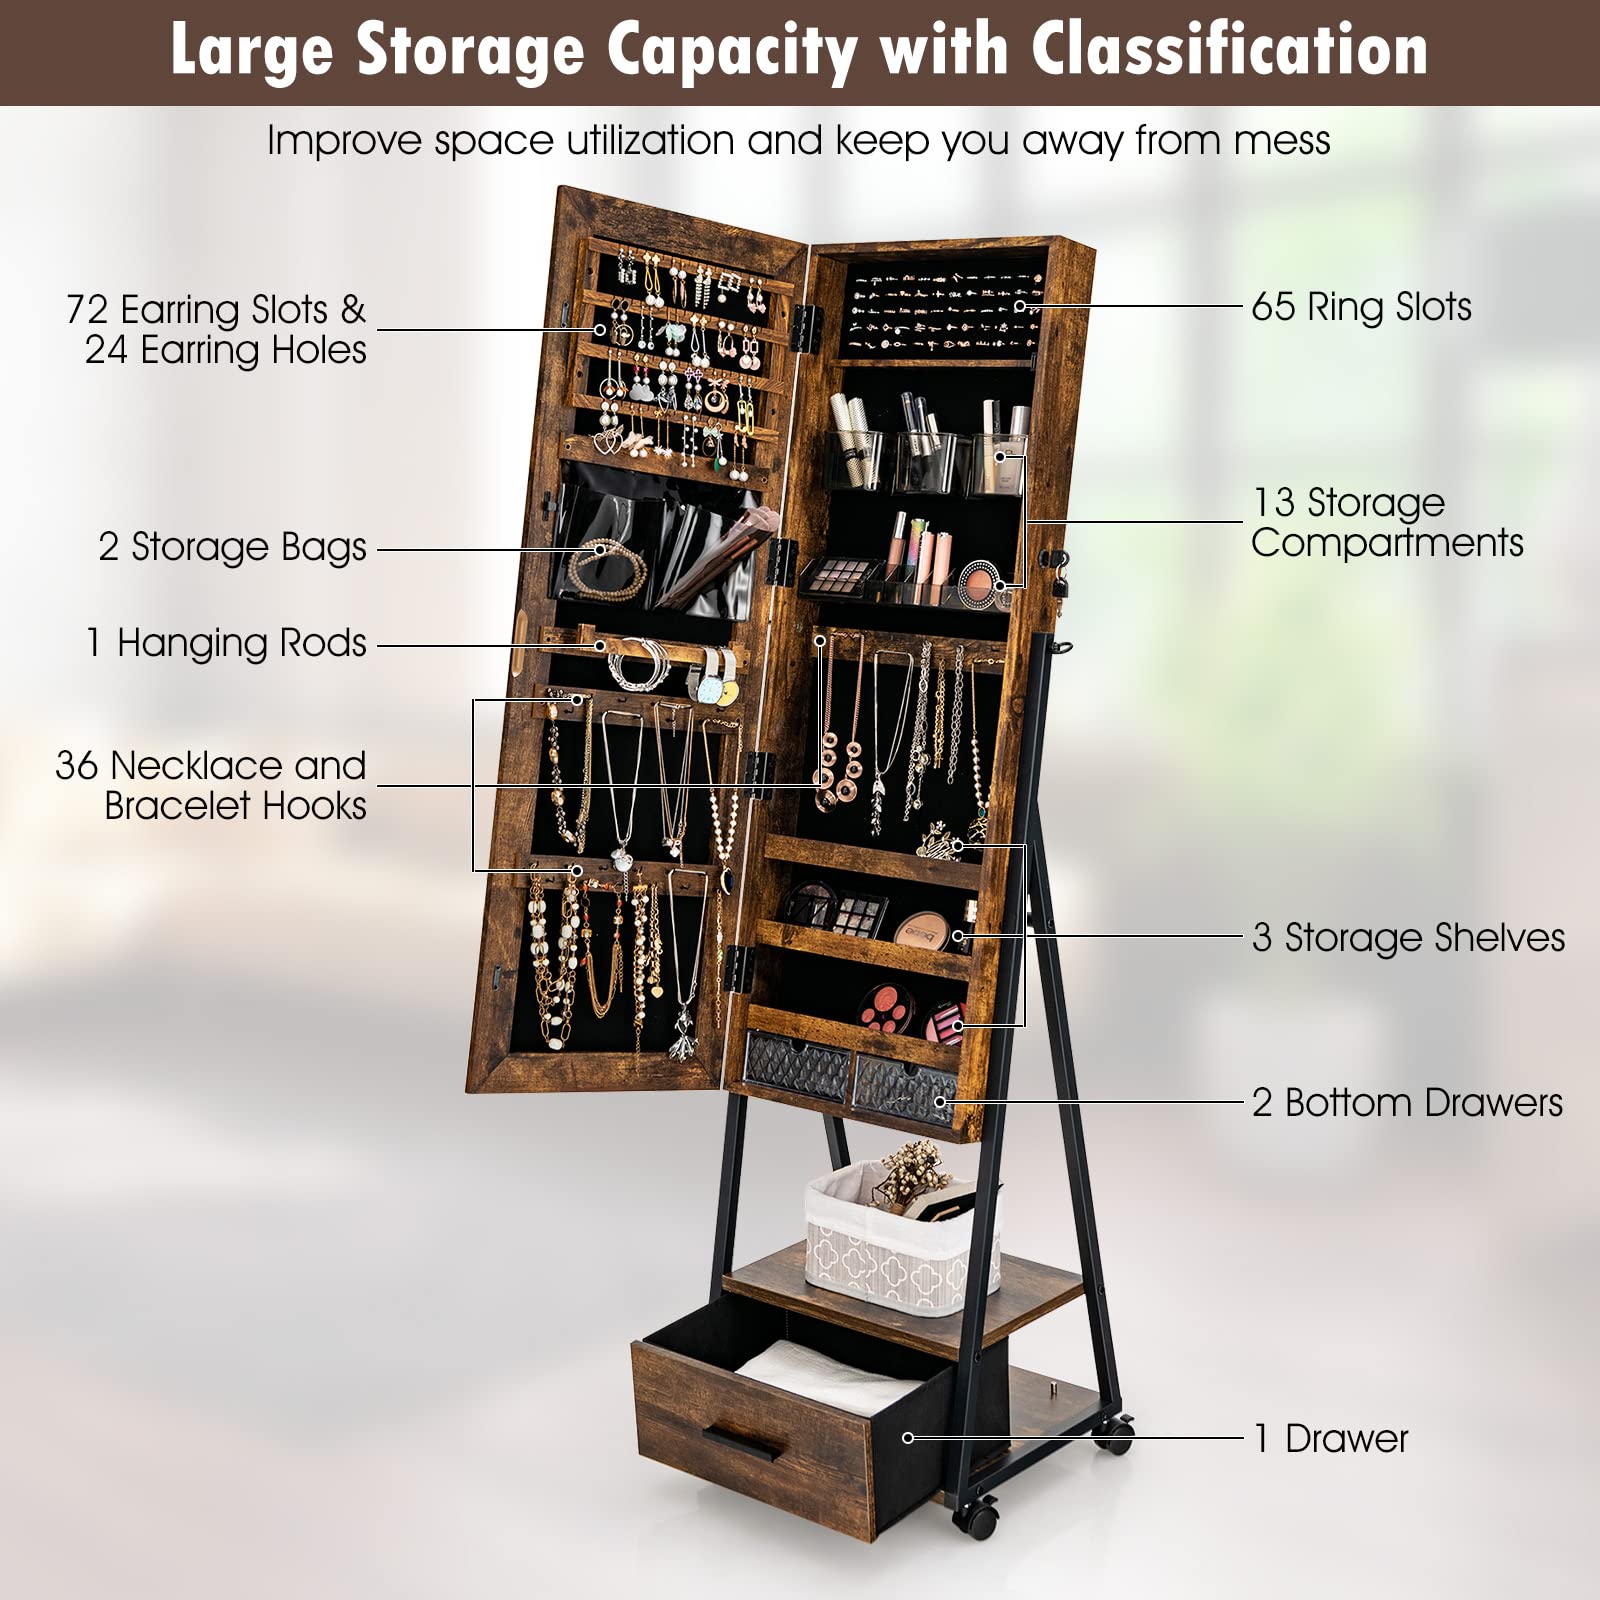 CHARMAID Rolling Jewelry Cabinet with Full Length Mirror, Lockable Standing Jewelry Armoire with Wheels